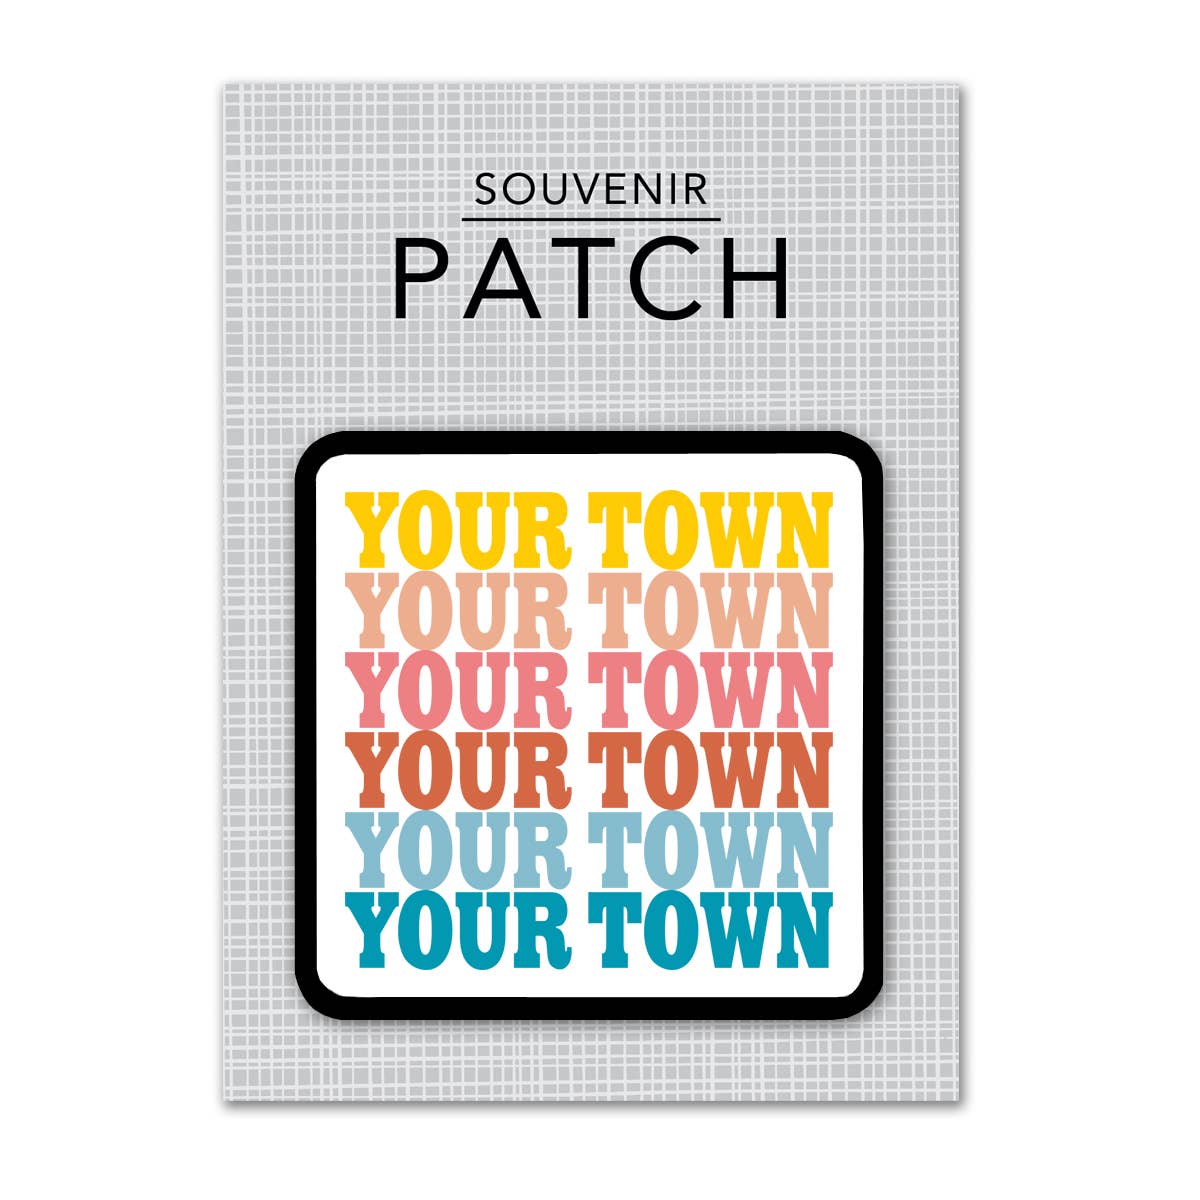 Personalized City Patch - Supergraphics